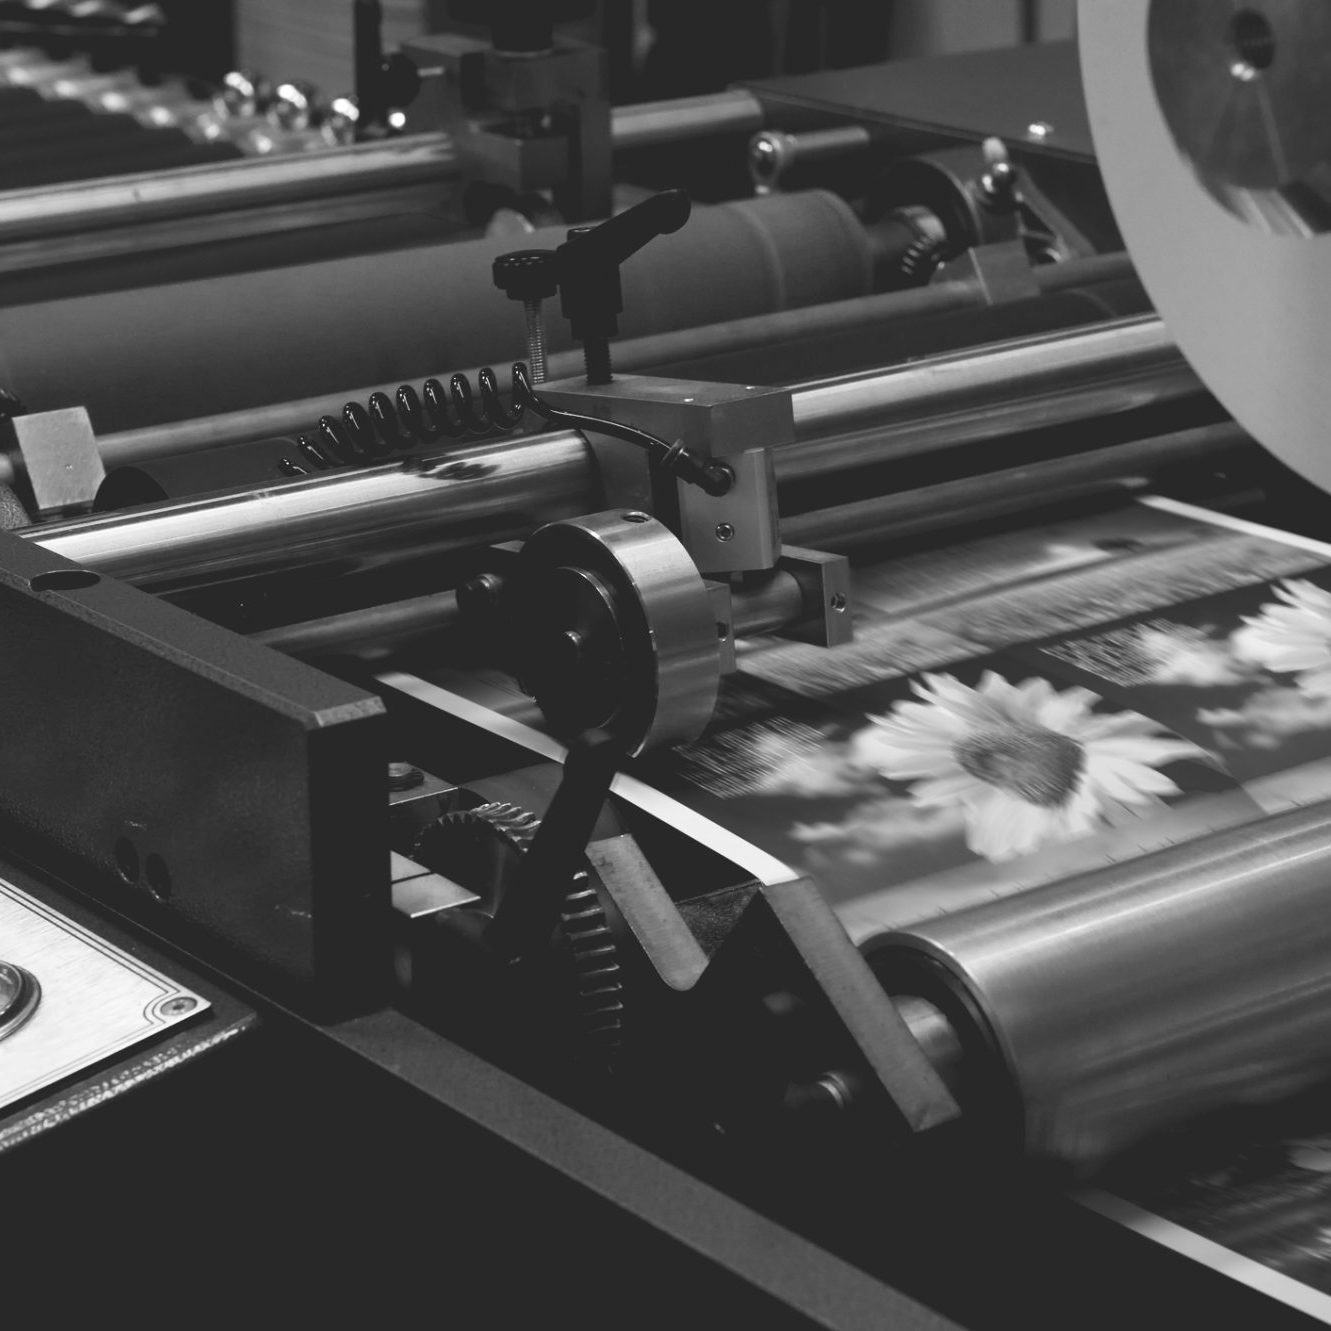 Small printing and finishing machine in black and white